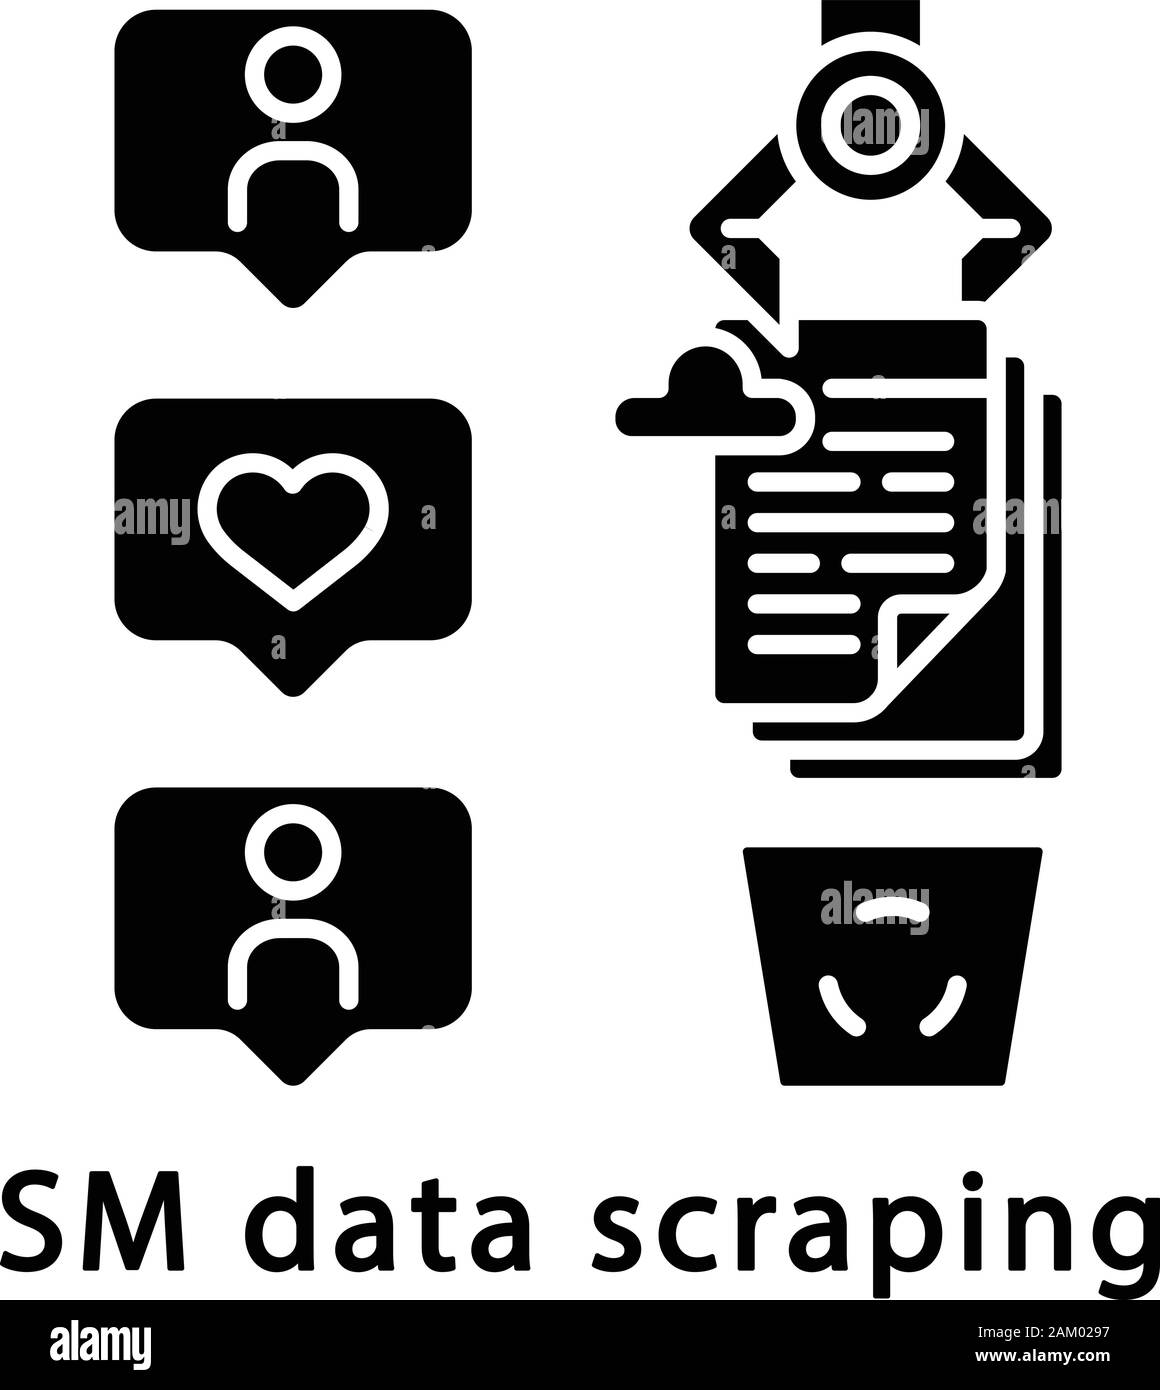 SM data scraping glyph icon. RPA. ?hat history archiving. Cloud storage automatic cleaning. Robot scraping social media data. Silhouette symbol. Negat Stock Vector